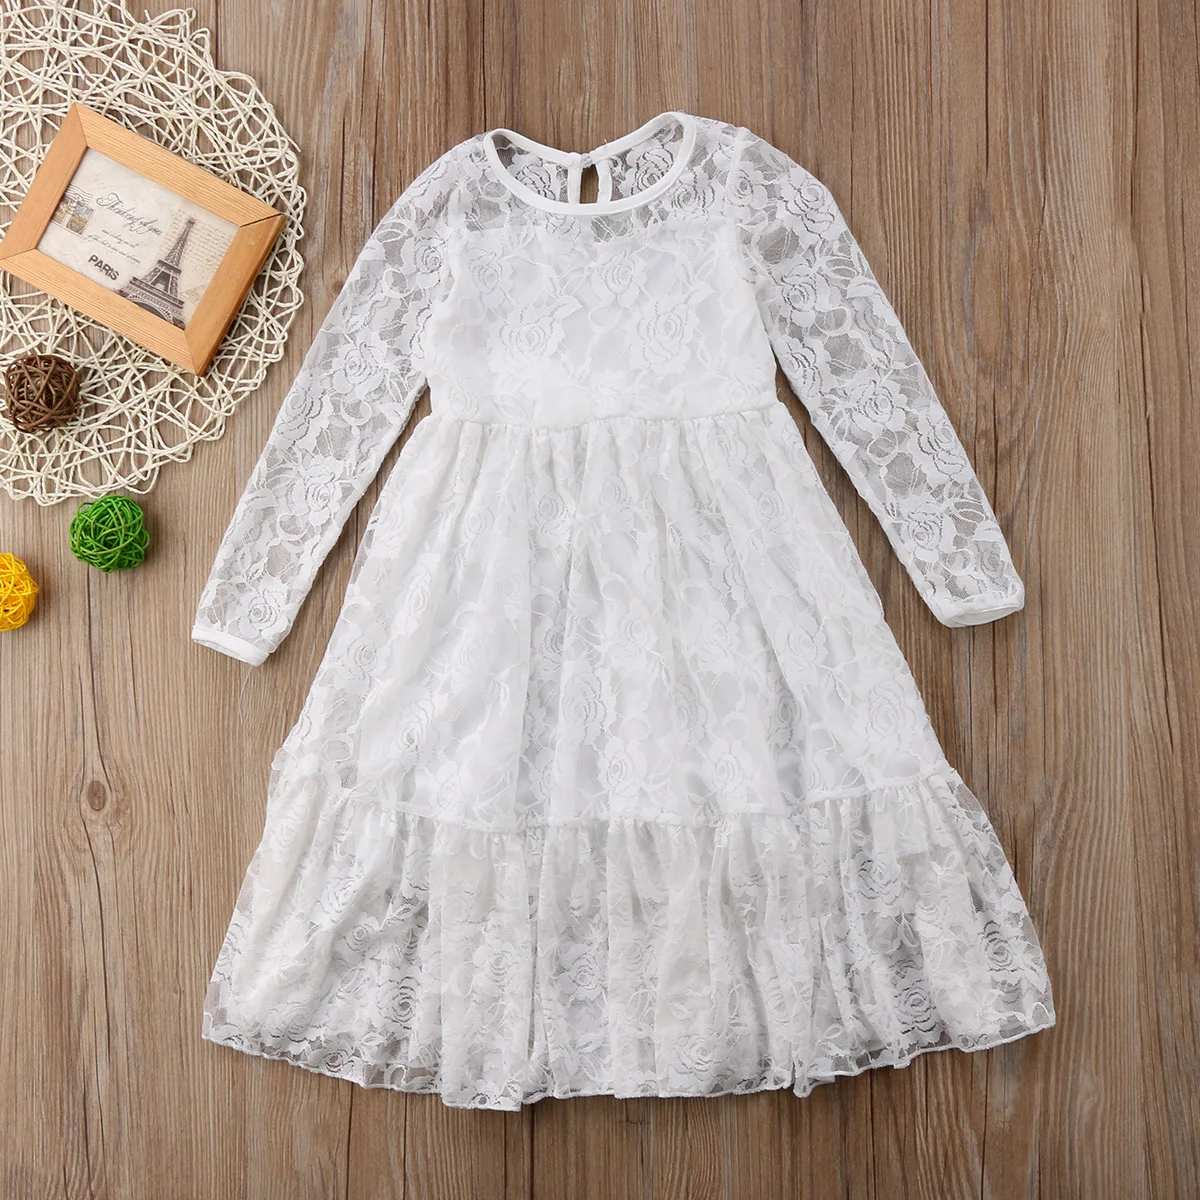 Kids Baby Girls Autumn Floral Sweet Fairy White Formal Long Sleeves Party Lace Wedding Princess Gown Pageant Flower Girls Dress - Цвет: Белый